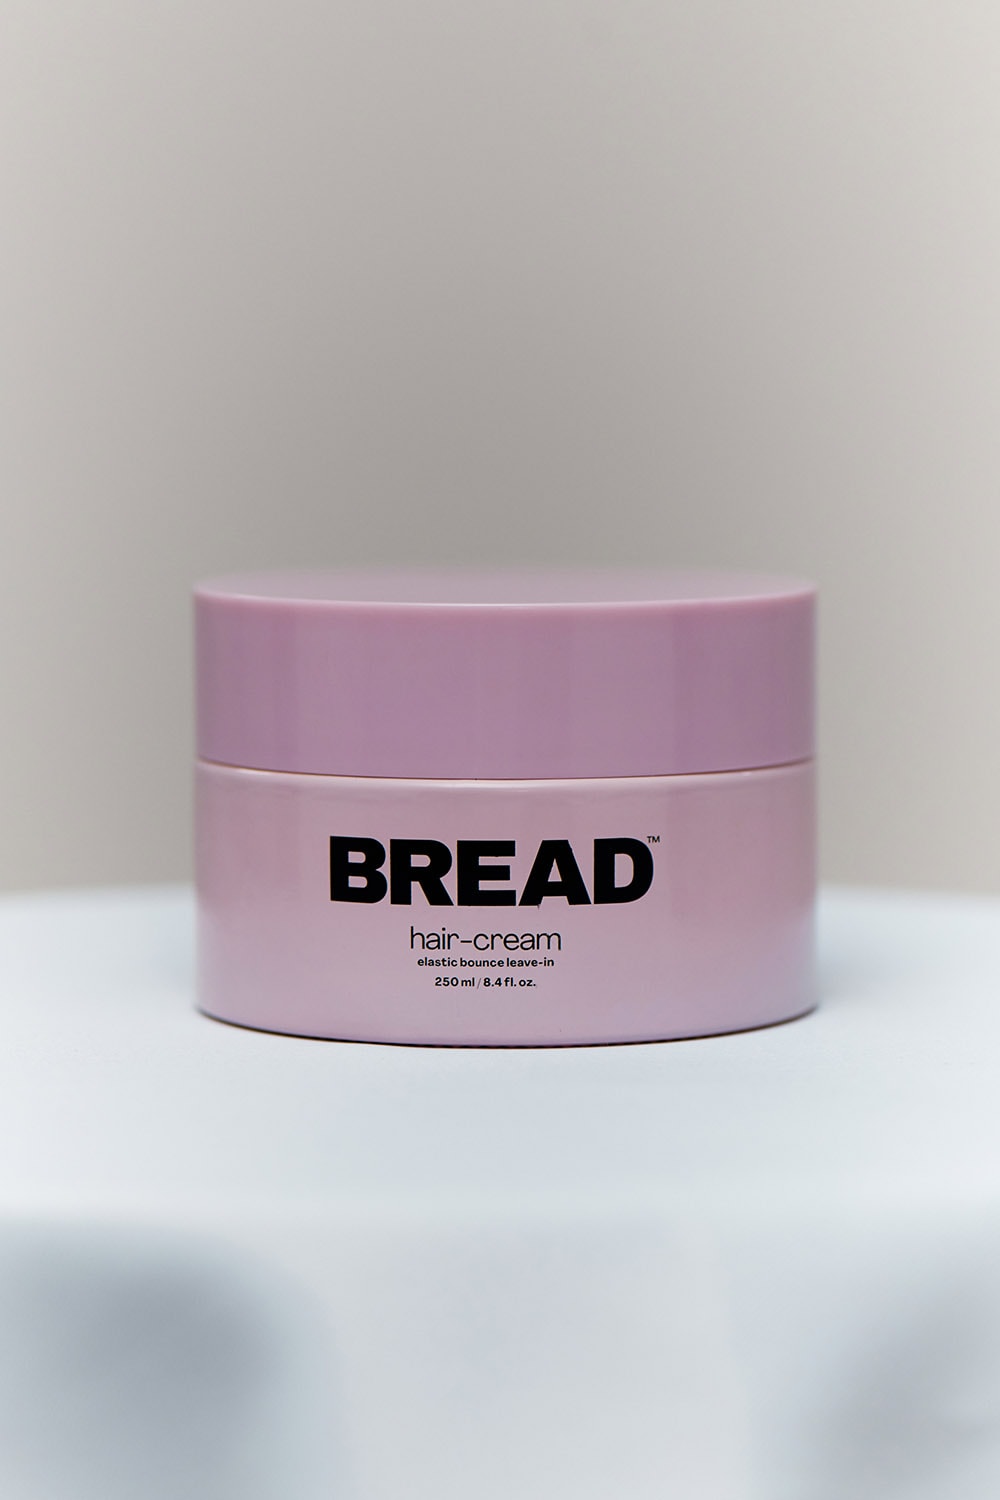 BREAD's New Elastic Bounce Leave-In Hair Cream Curly Styling Product